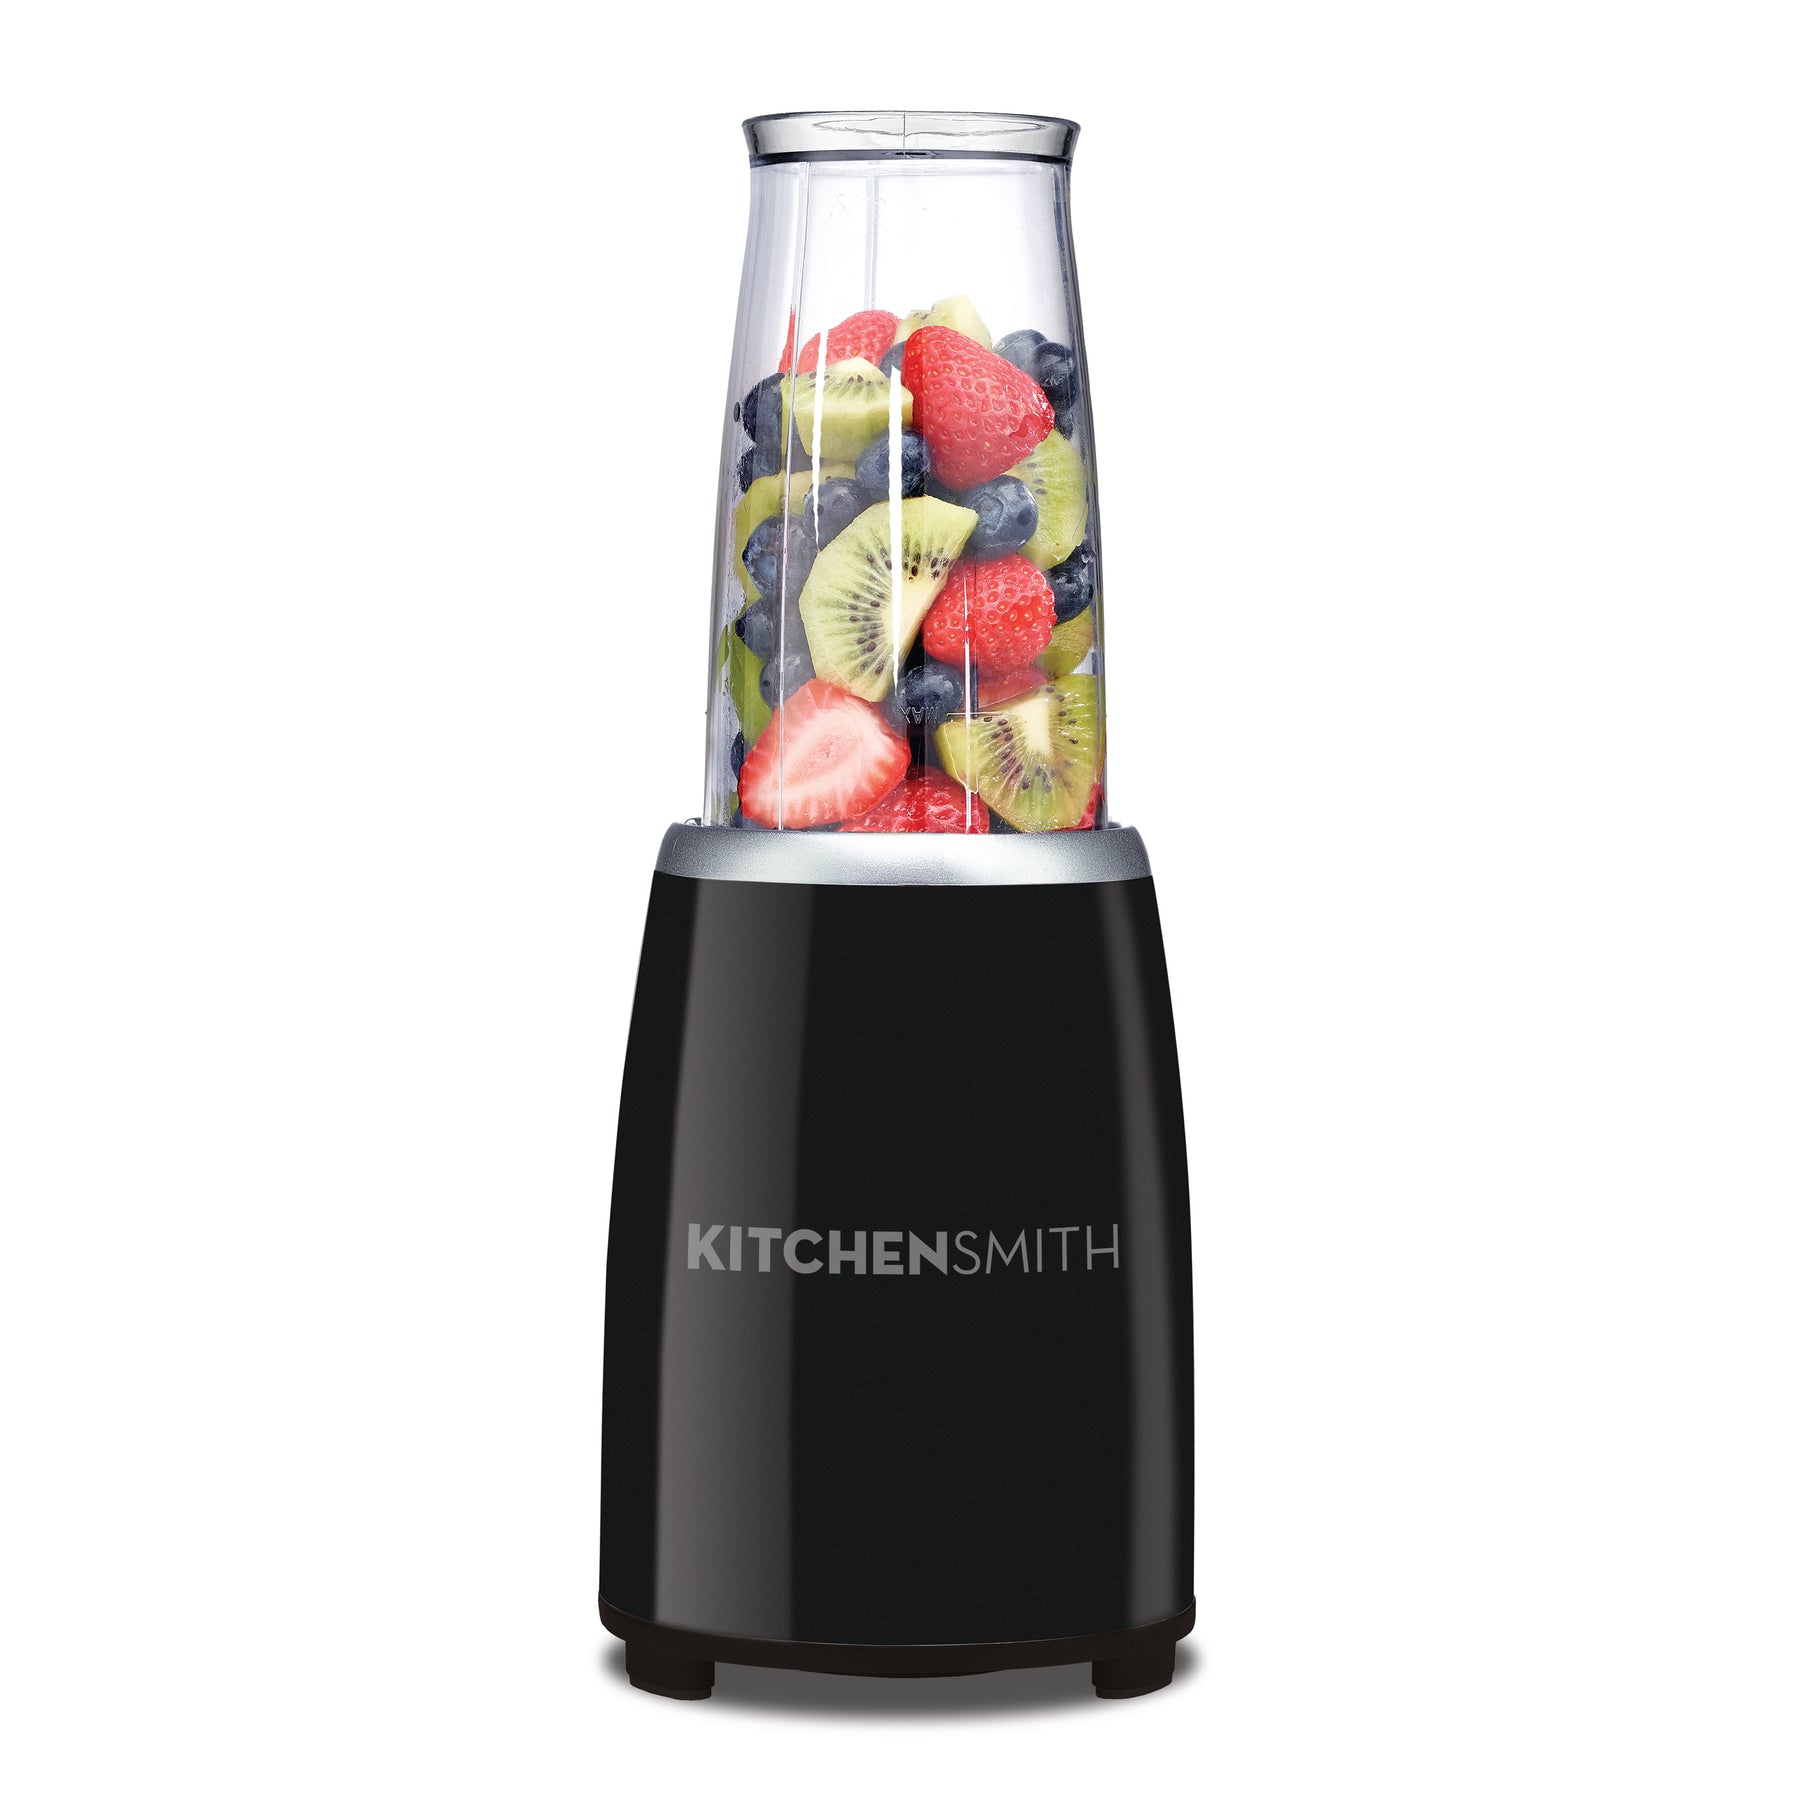 How to Use Kitchen Smith Blender